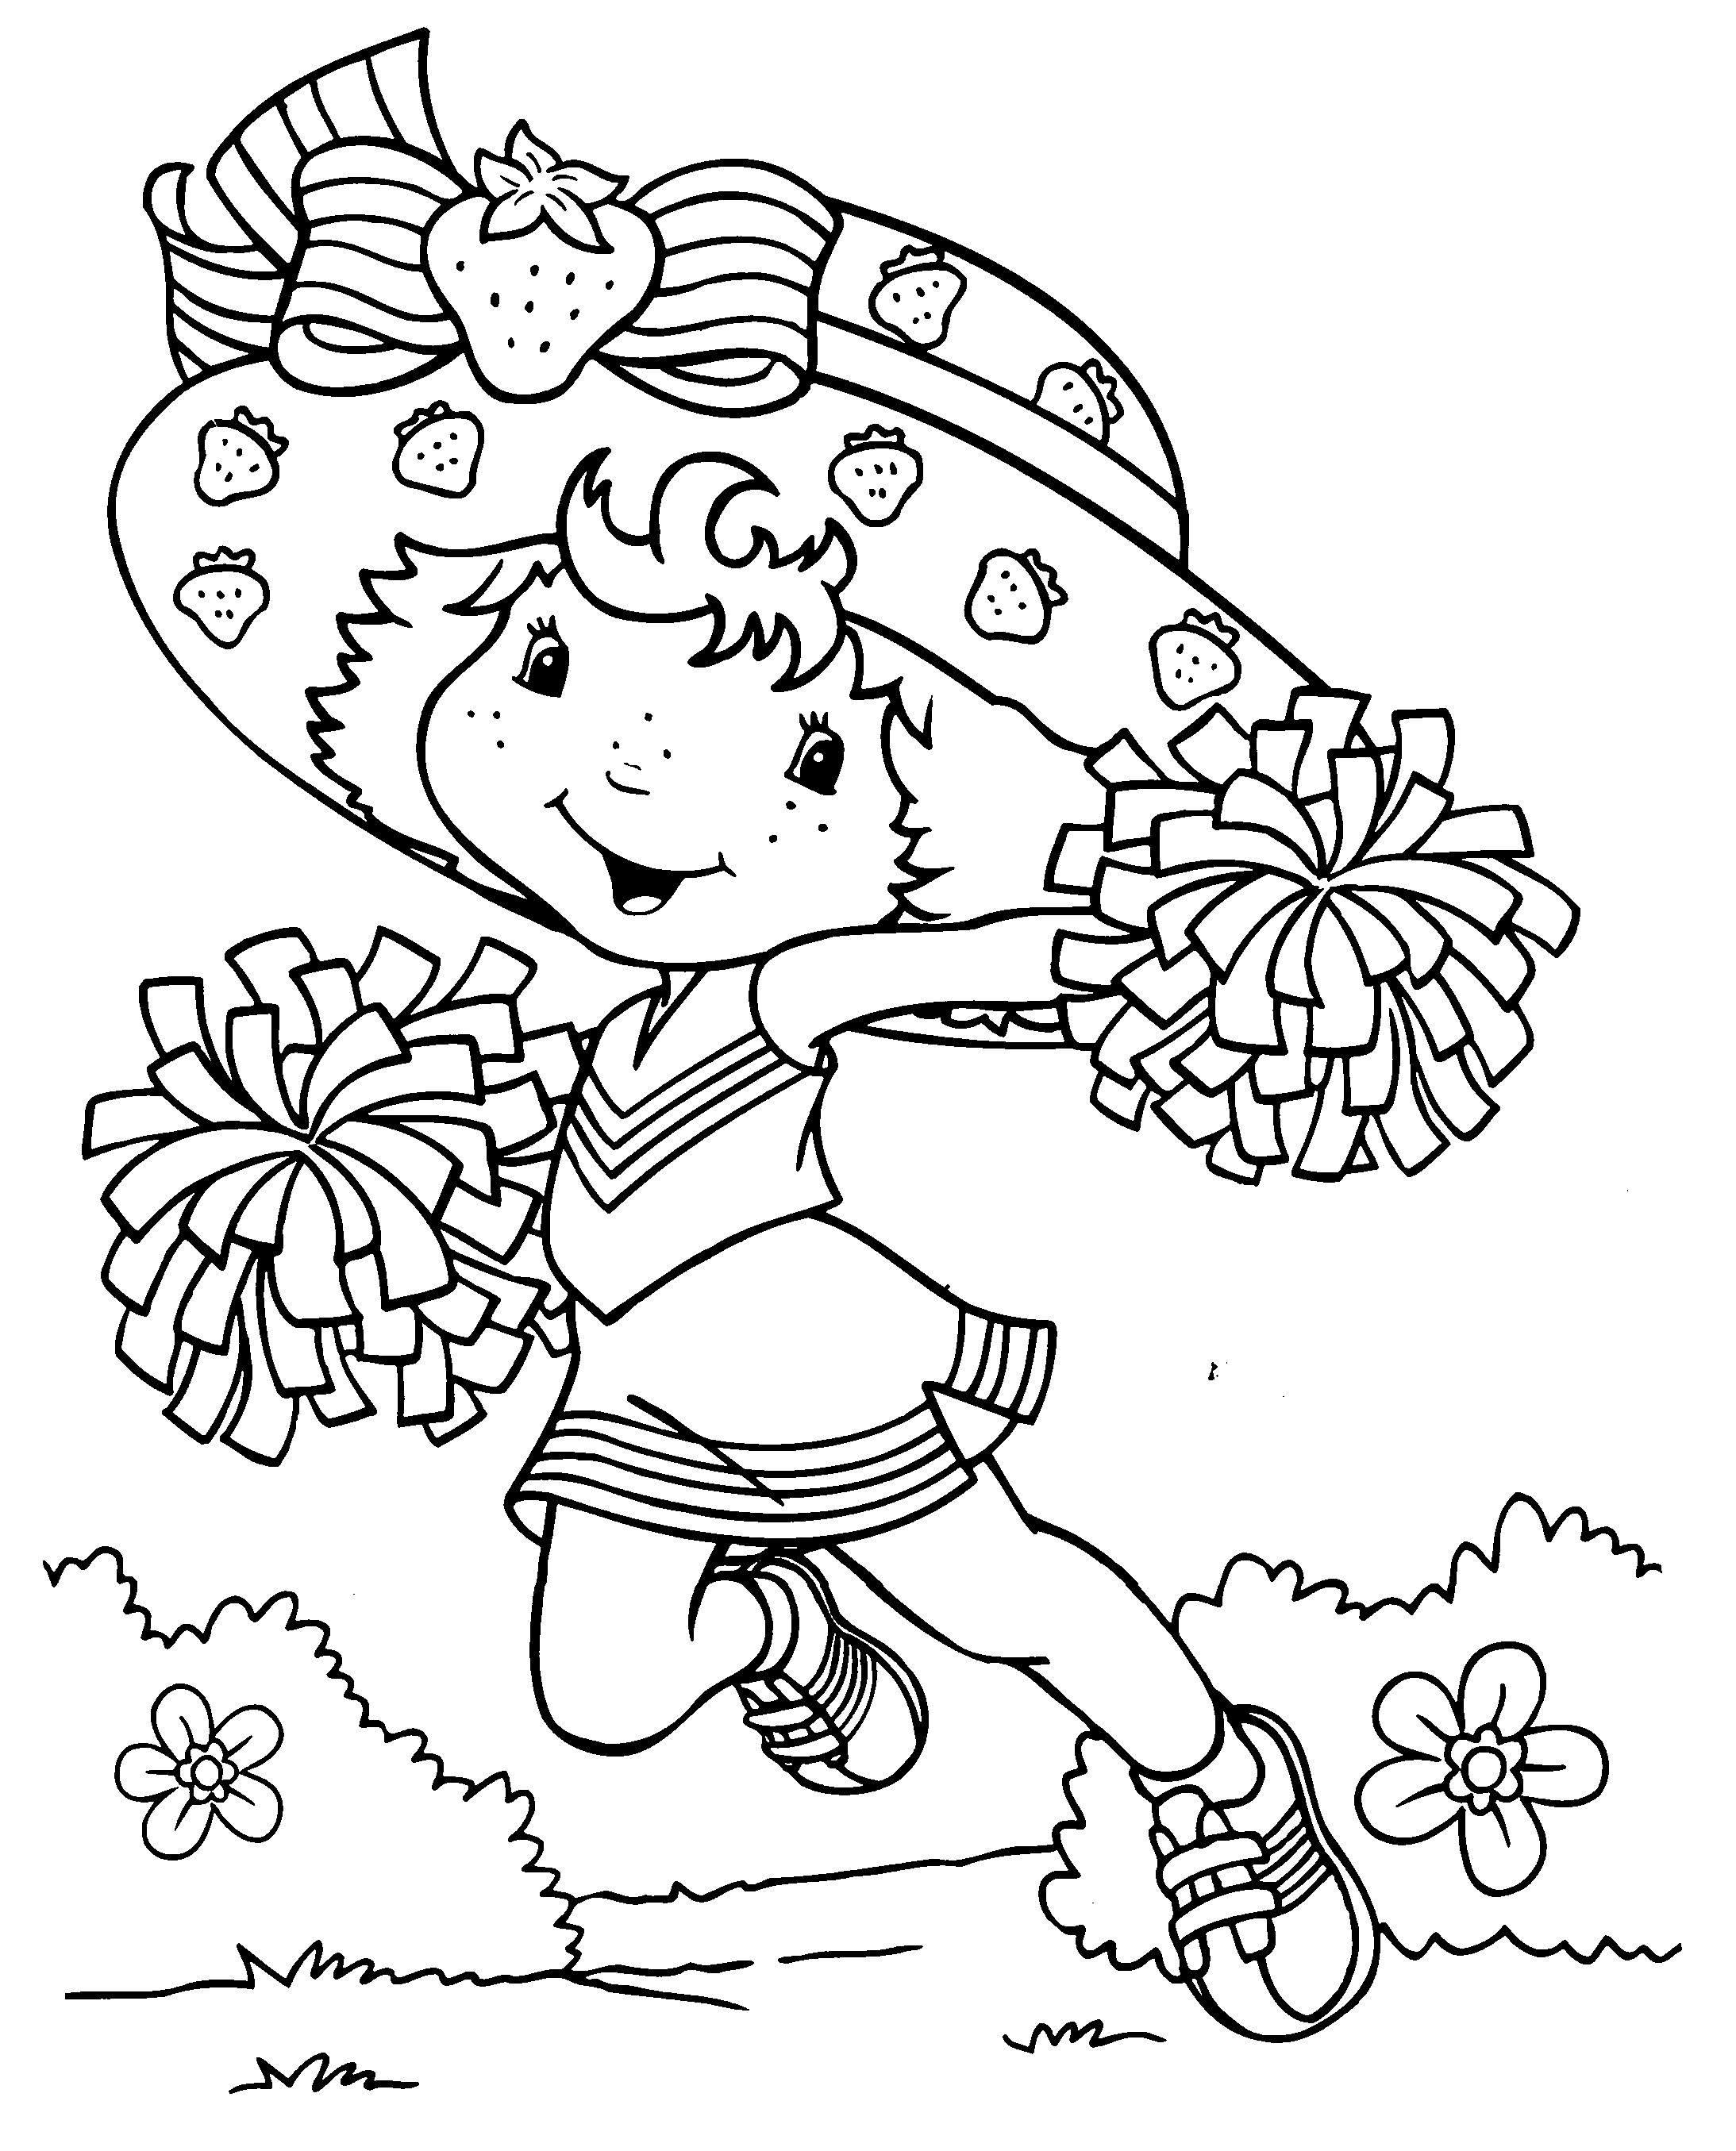 Coloring Sheets For Girls Free Printable
 Free Printable Strawberry Shortcake Coloring Pages For Kids